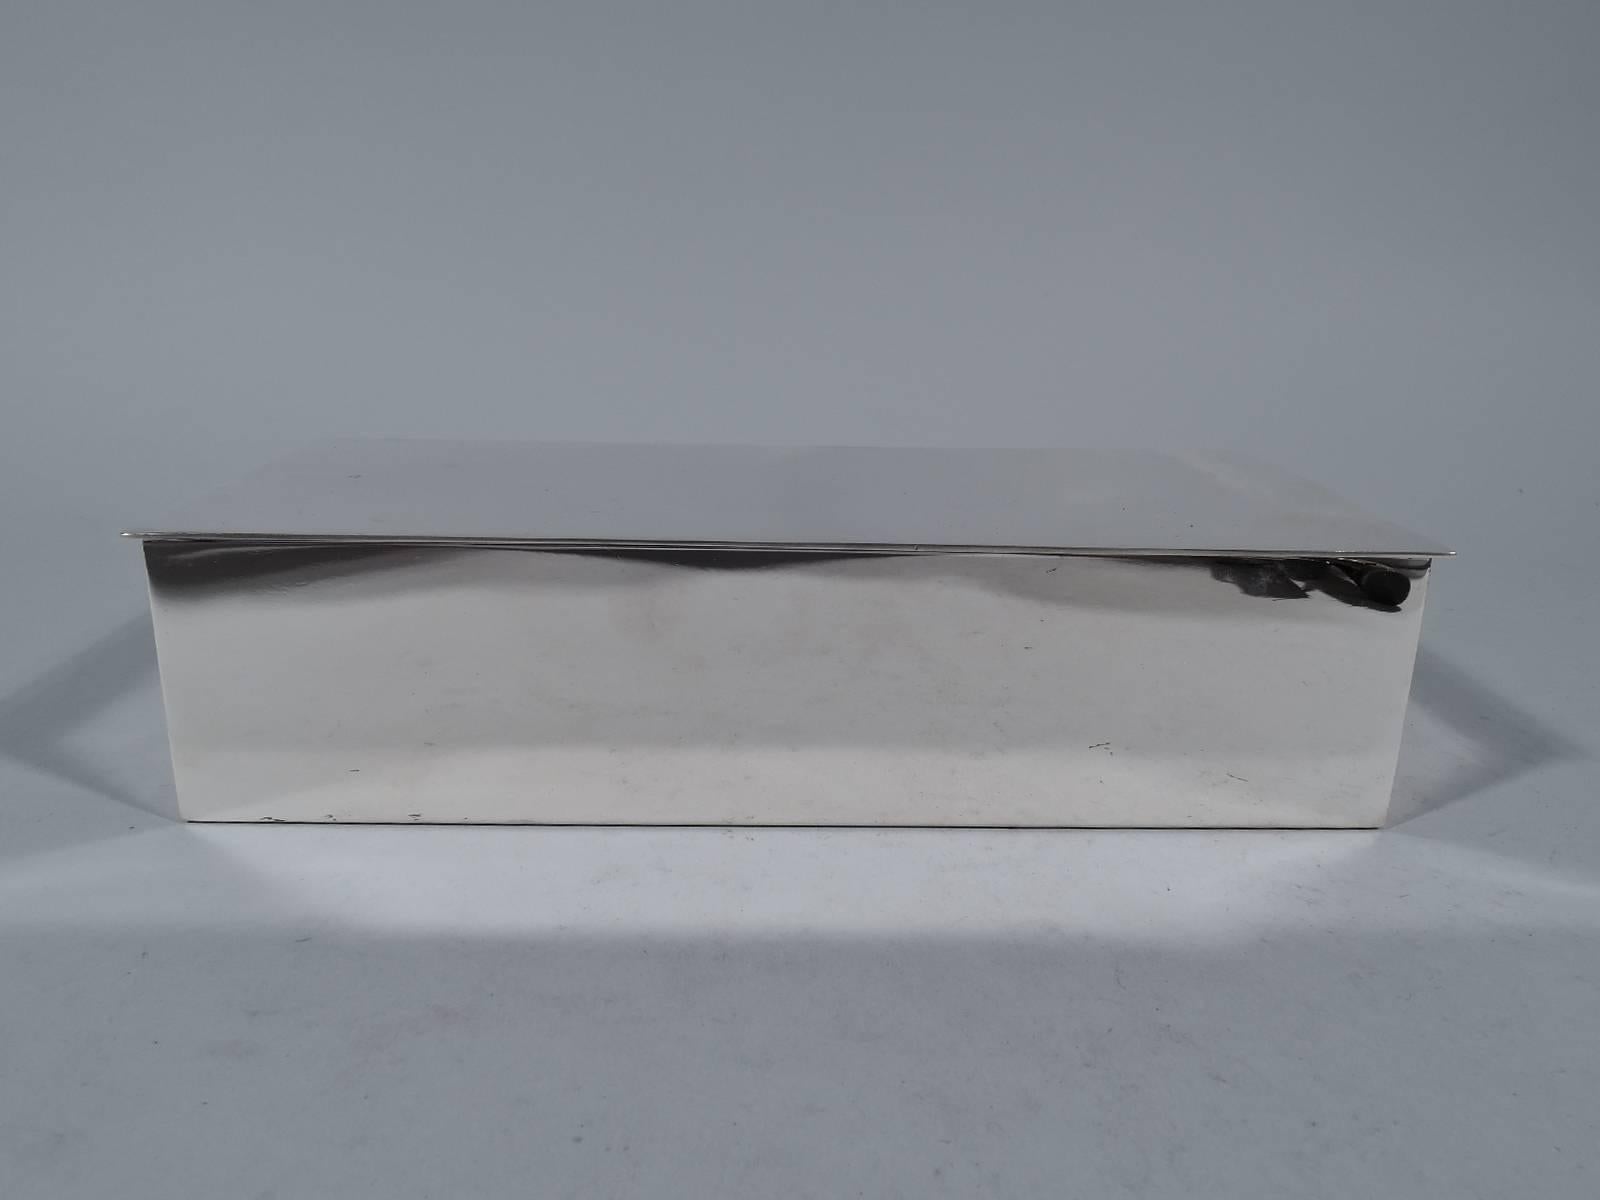 Sterling silver desk box. Made by Tiffany & Co. in New York. Rectangular with straight sides. Cover flat and hinged with discreet overhang. Box interior cedar-lined and partitioned. Hallmark includes postwar pattern no. 23328. Gross weight: 19.6